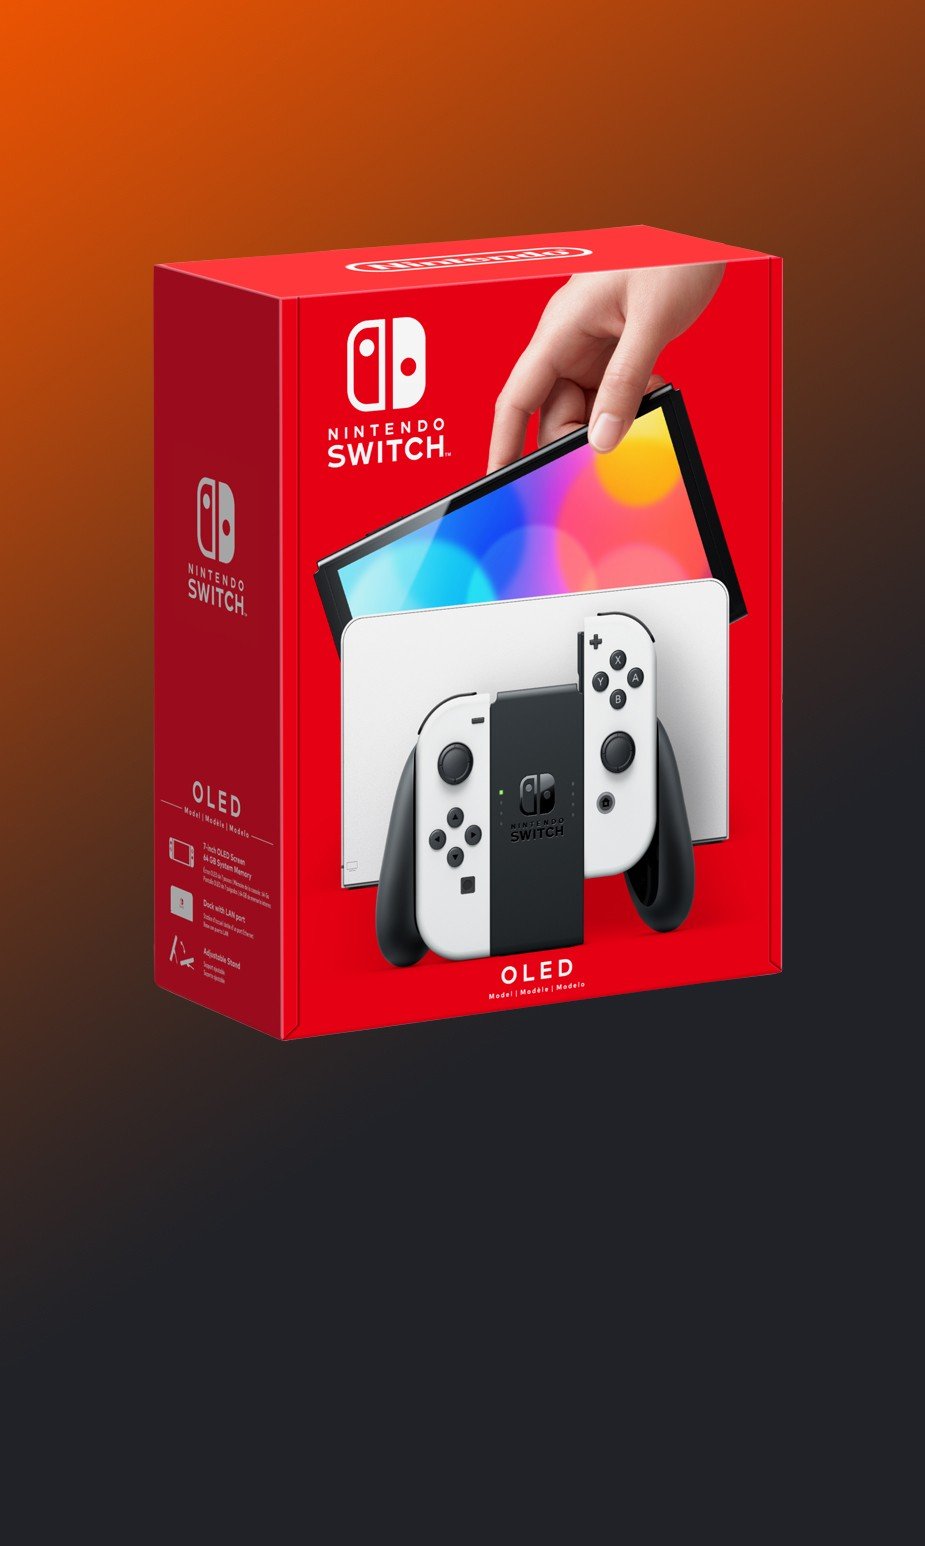 Nintendo Switch OLED model: What you need to know